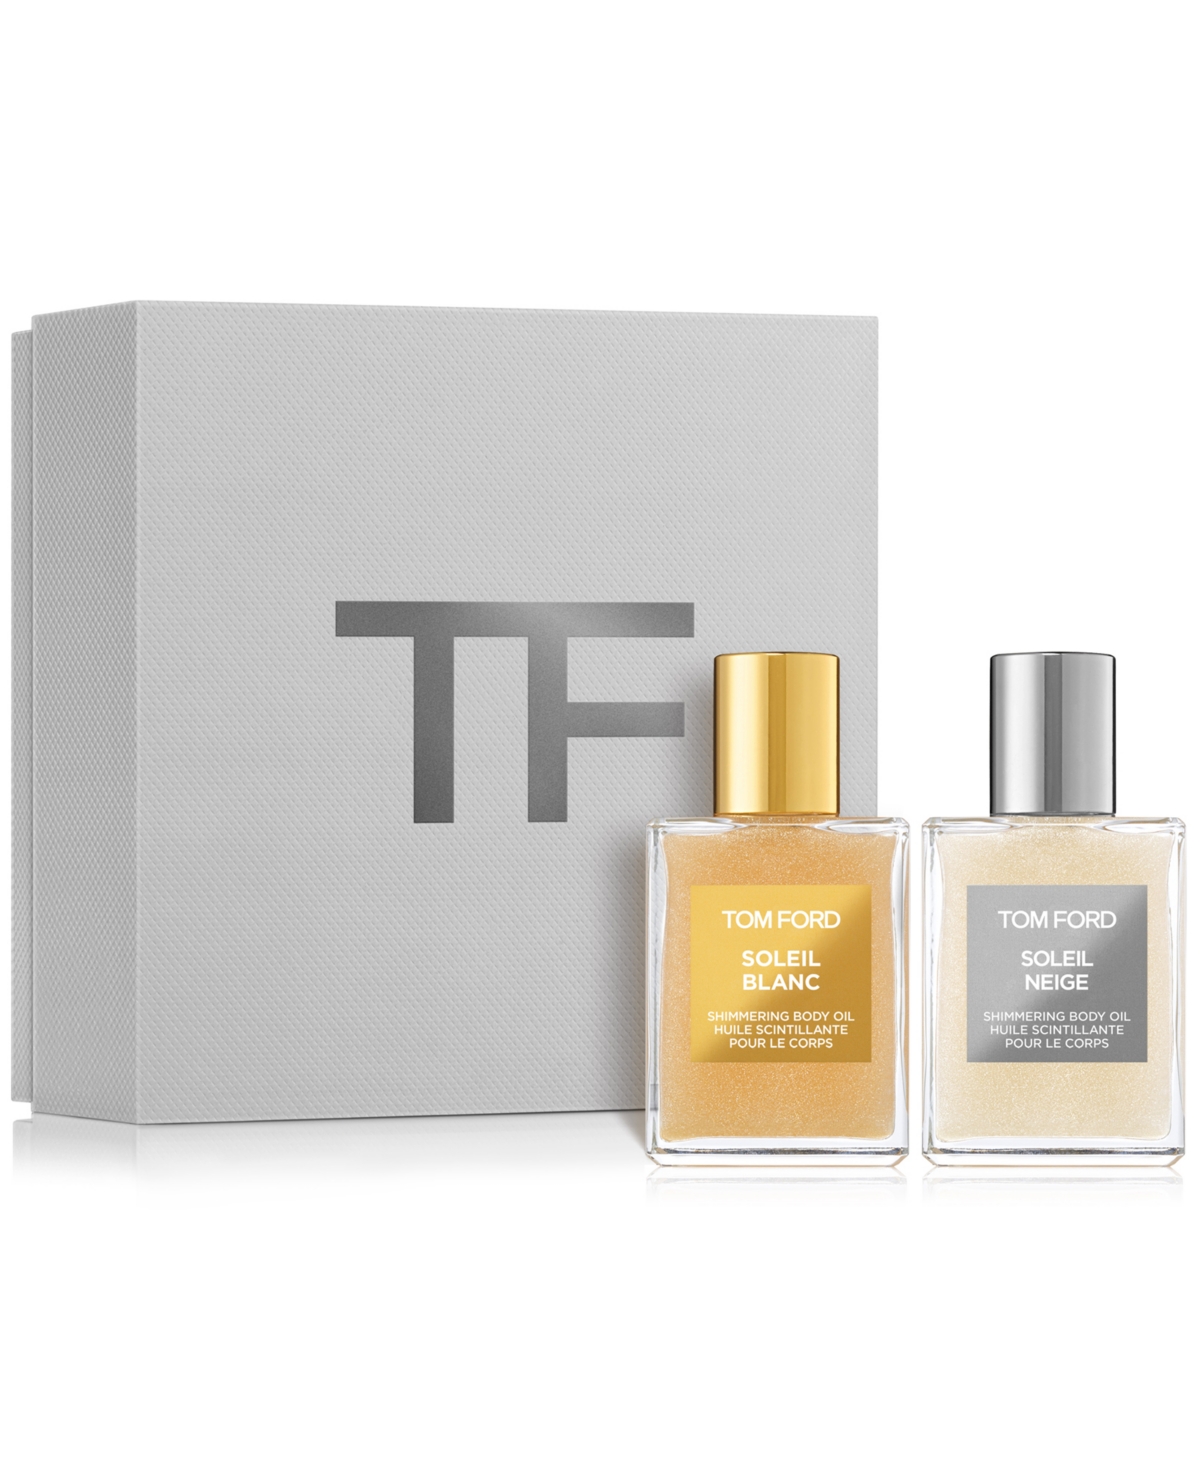 UPC 888066142274 product image for Tom Ford 2-Pc. Soleil Shimmering Body Oil Holiday Gift Set | upcitemdb.com